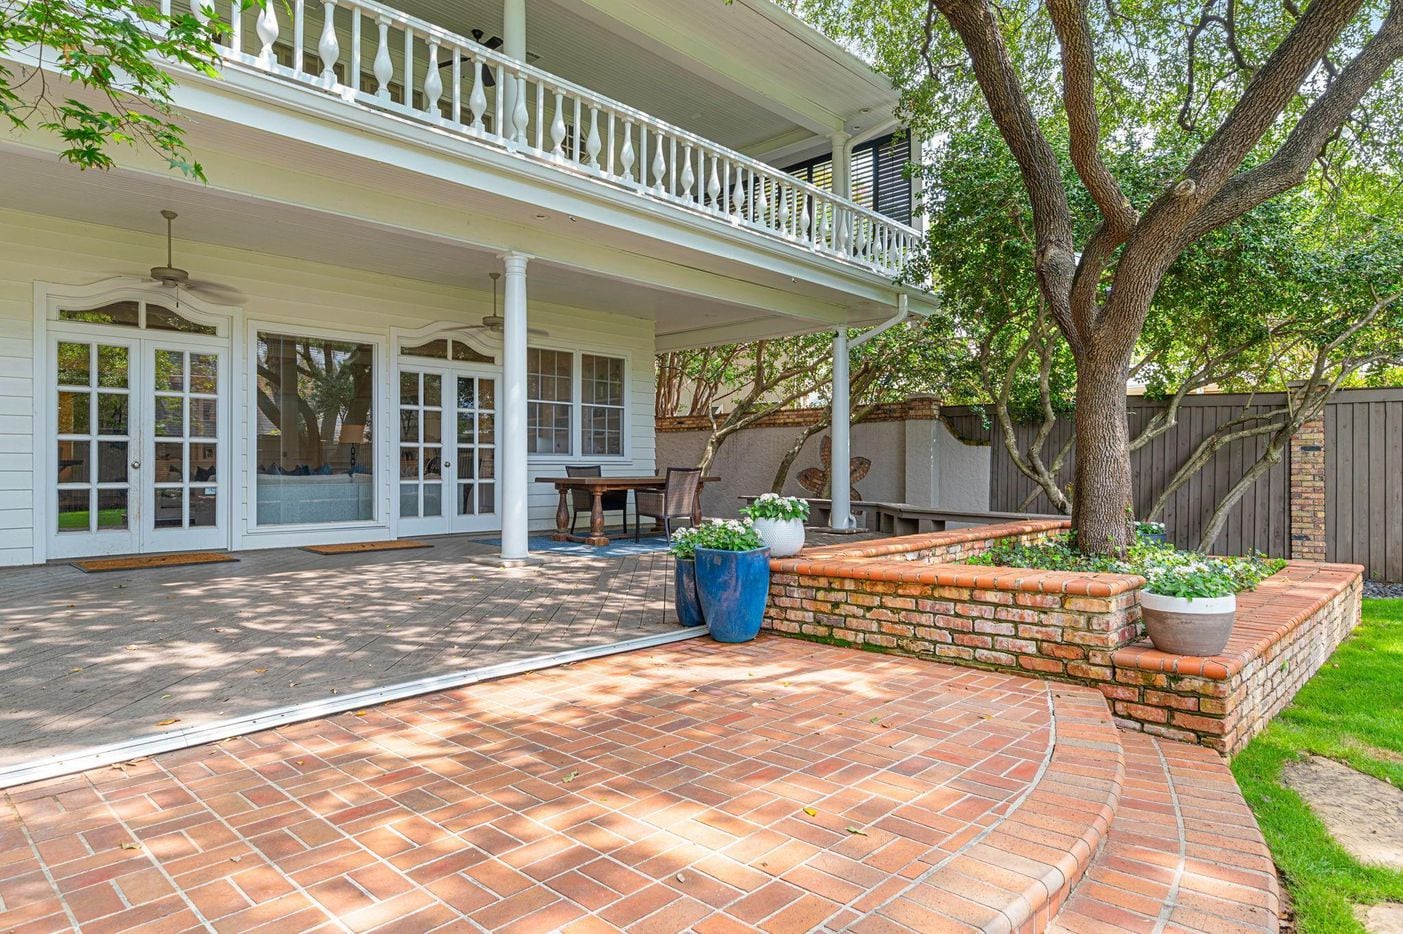 Take a look at the home at 3815 Beverly Drive in Highland Park.